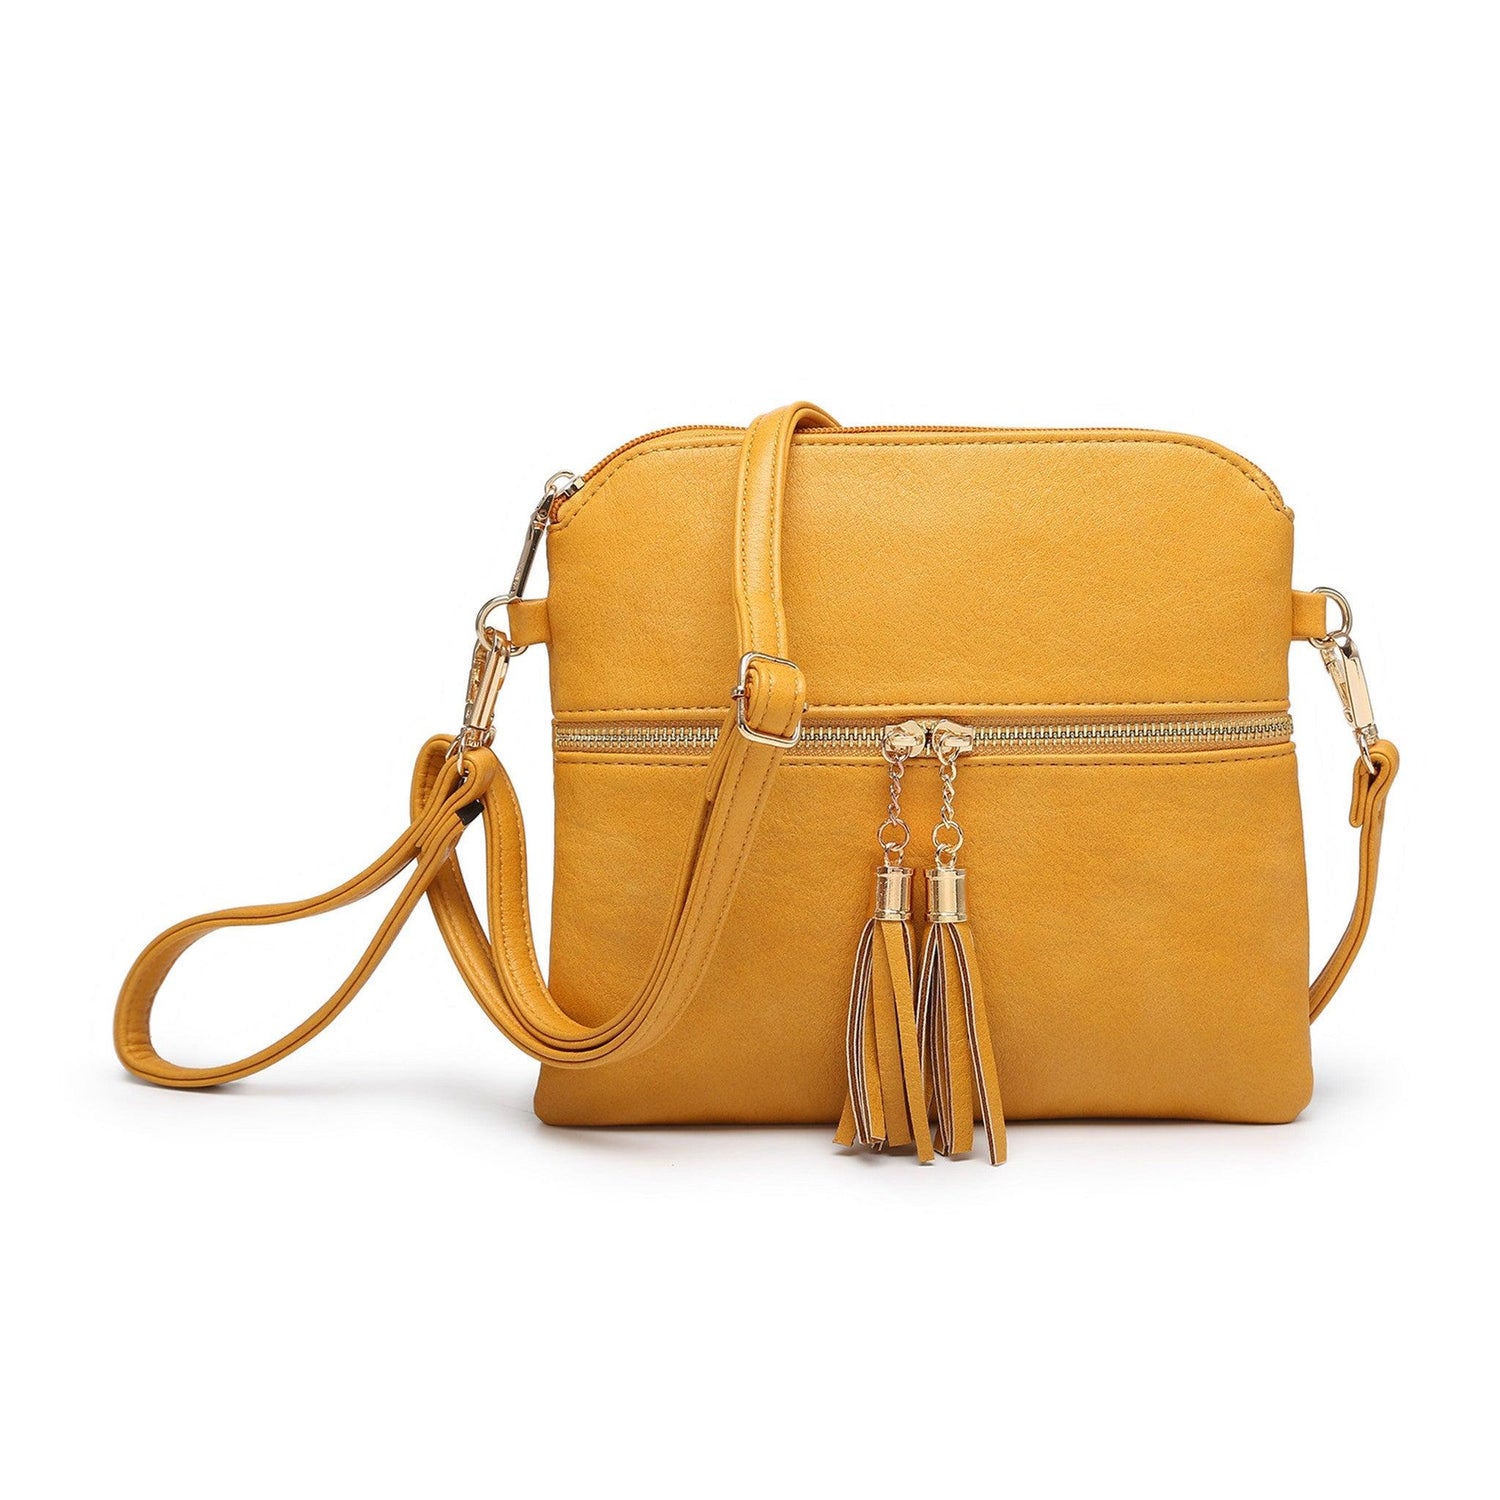 Two-Tone Crossbody Bag with Tassels.